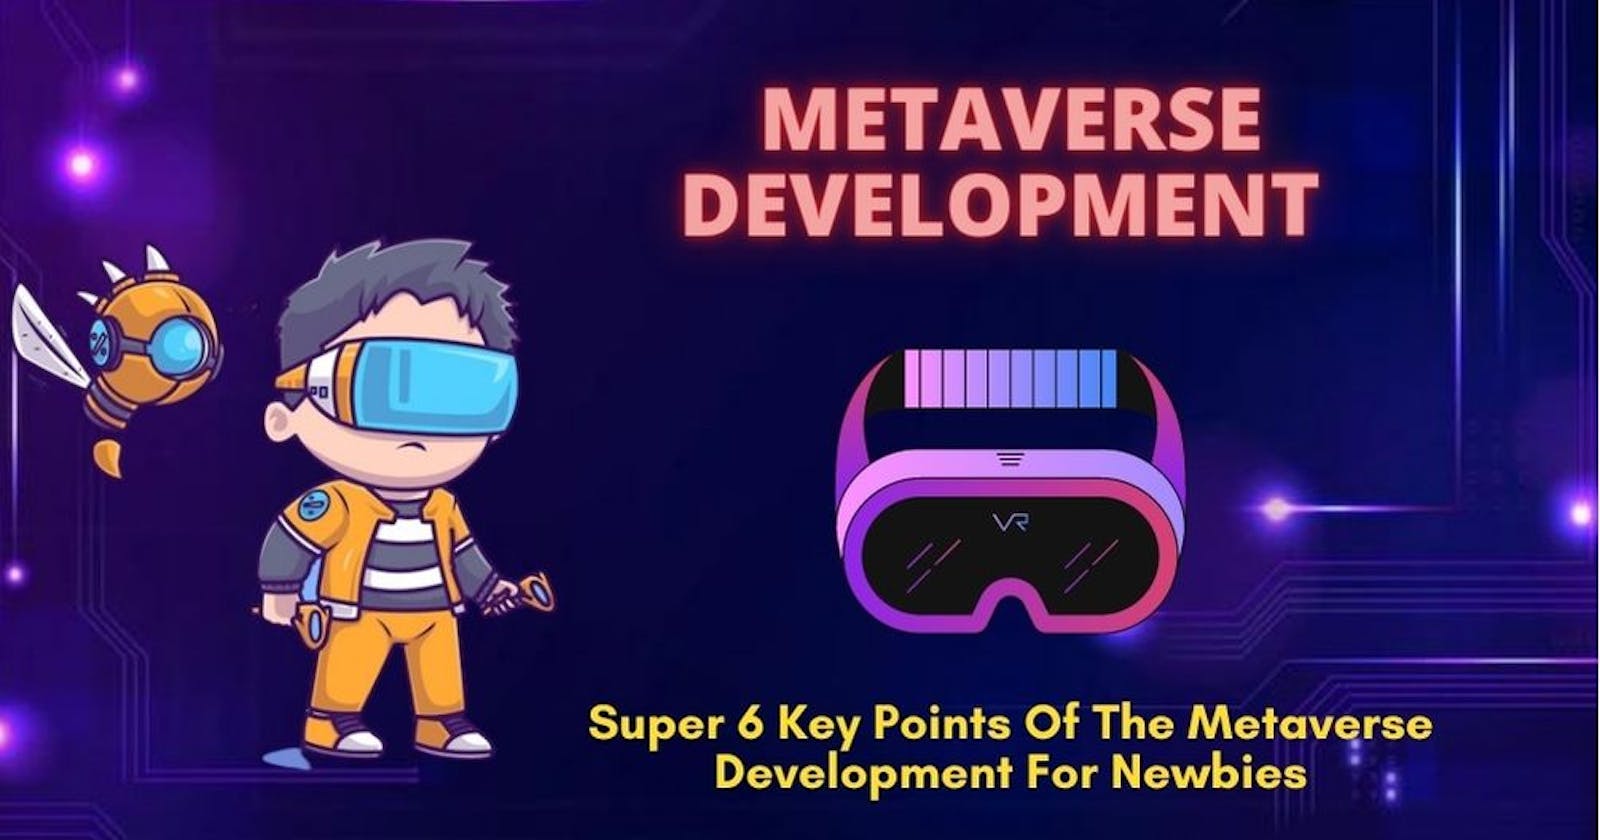 Super 6 Key Points Of The Metaverse Development For Newbies